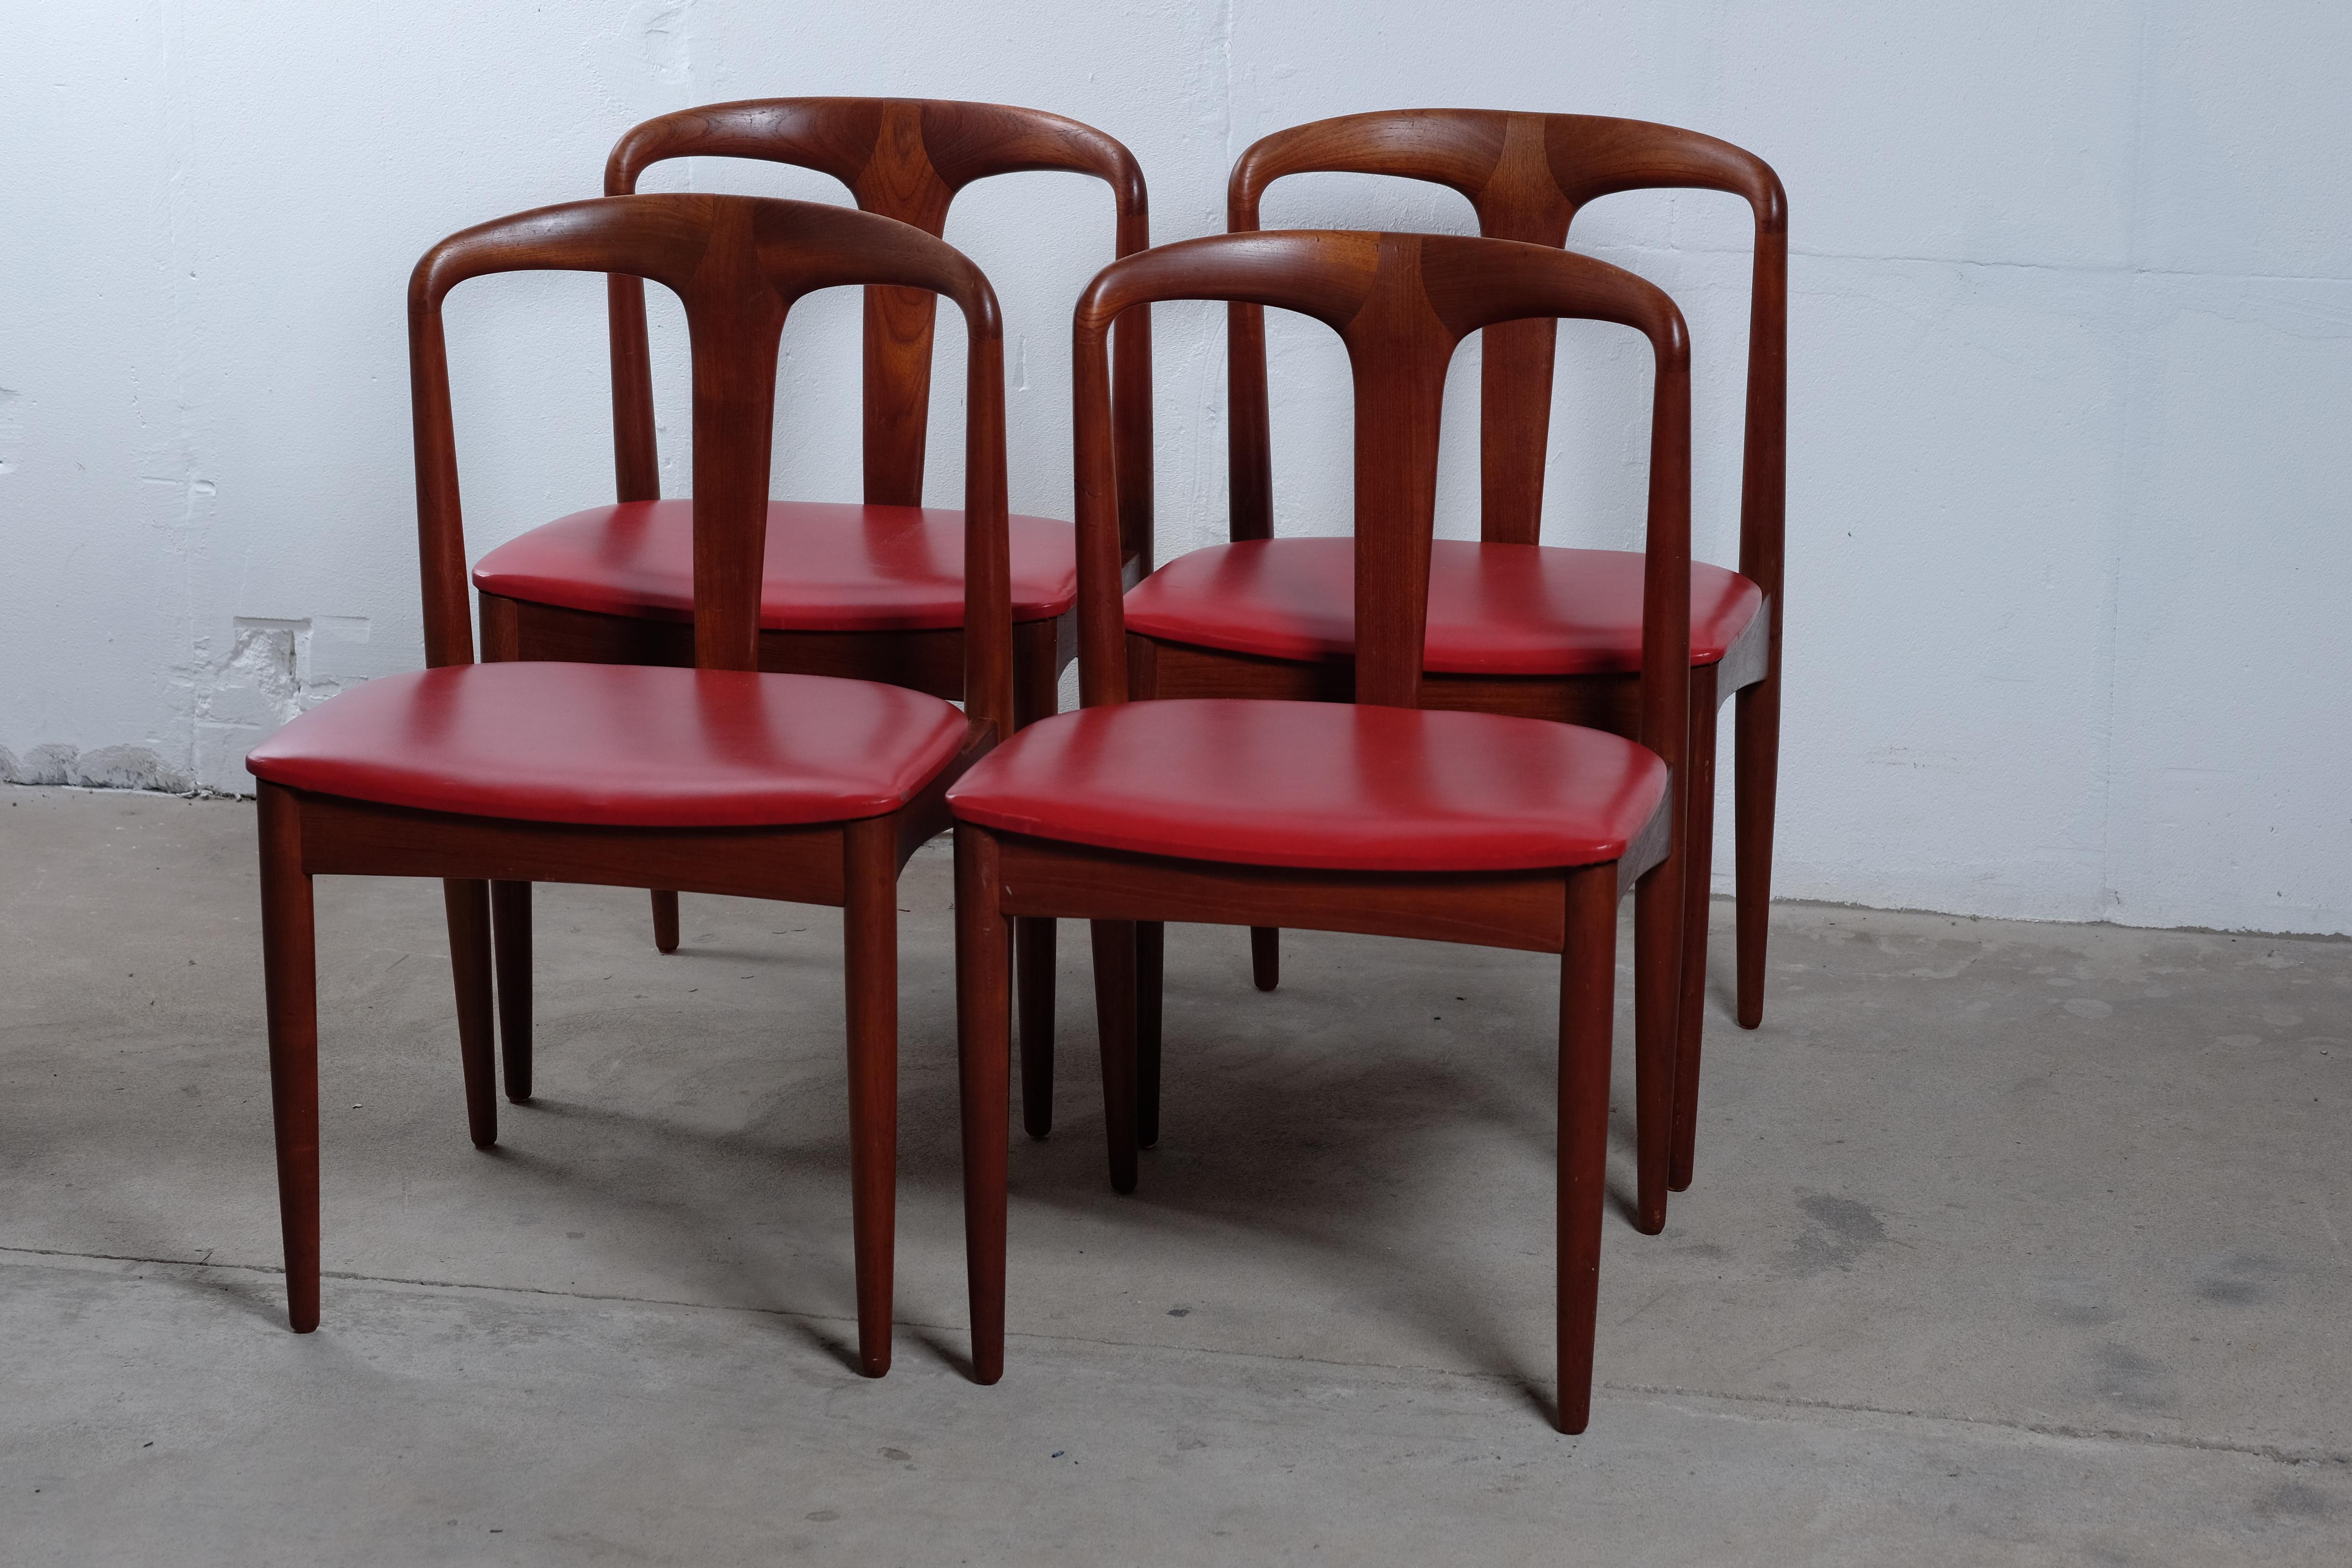 Set of four beautiful ladies! 'Juliane' chairs in teak by one of our greatest designers. This Danish mid-century chair was designed by Johannes Andersen for Vamo Møbelfabrik during the 1960s. The teak frame is in a beautiful organic design with